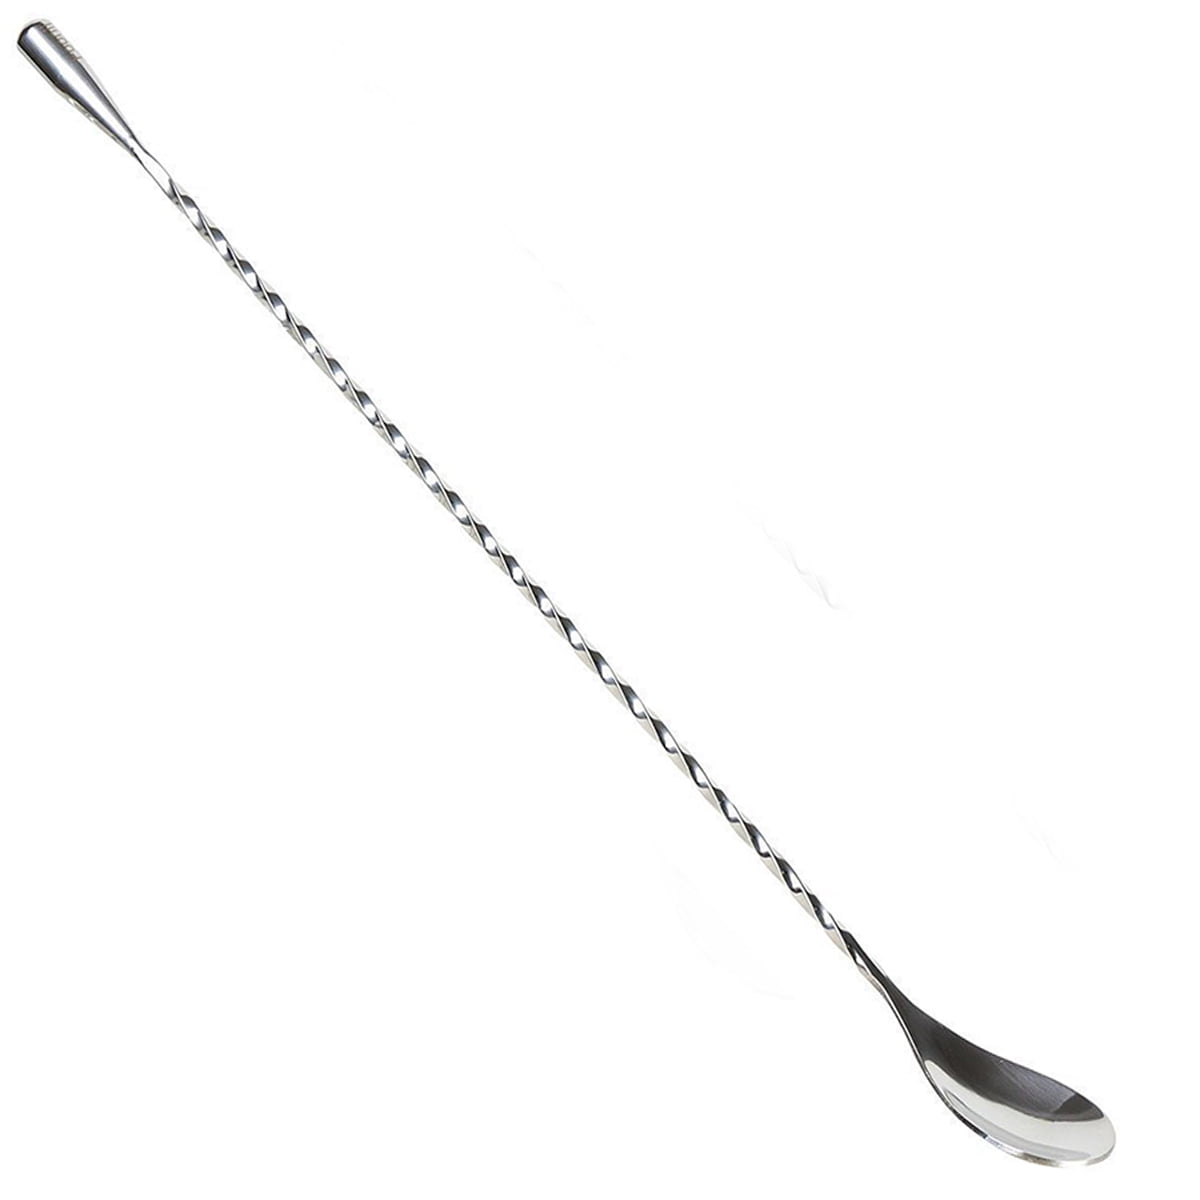 20cm Drink Stirrer Mixer for Tall Glasses Ideal for Bars Long Handle Spoon Parties or at Home Oak & Steel Set of 8 Stainless Steel Cocktail Mixing Spoons Cocktail Shakers Restaurants 